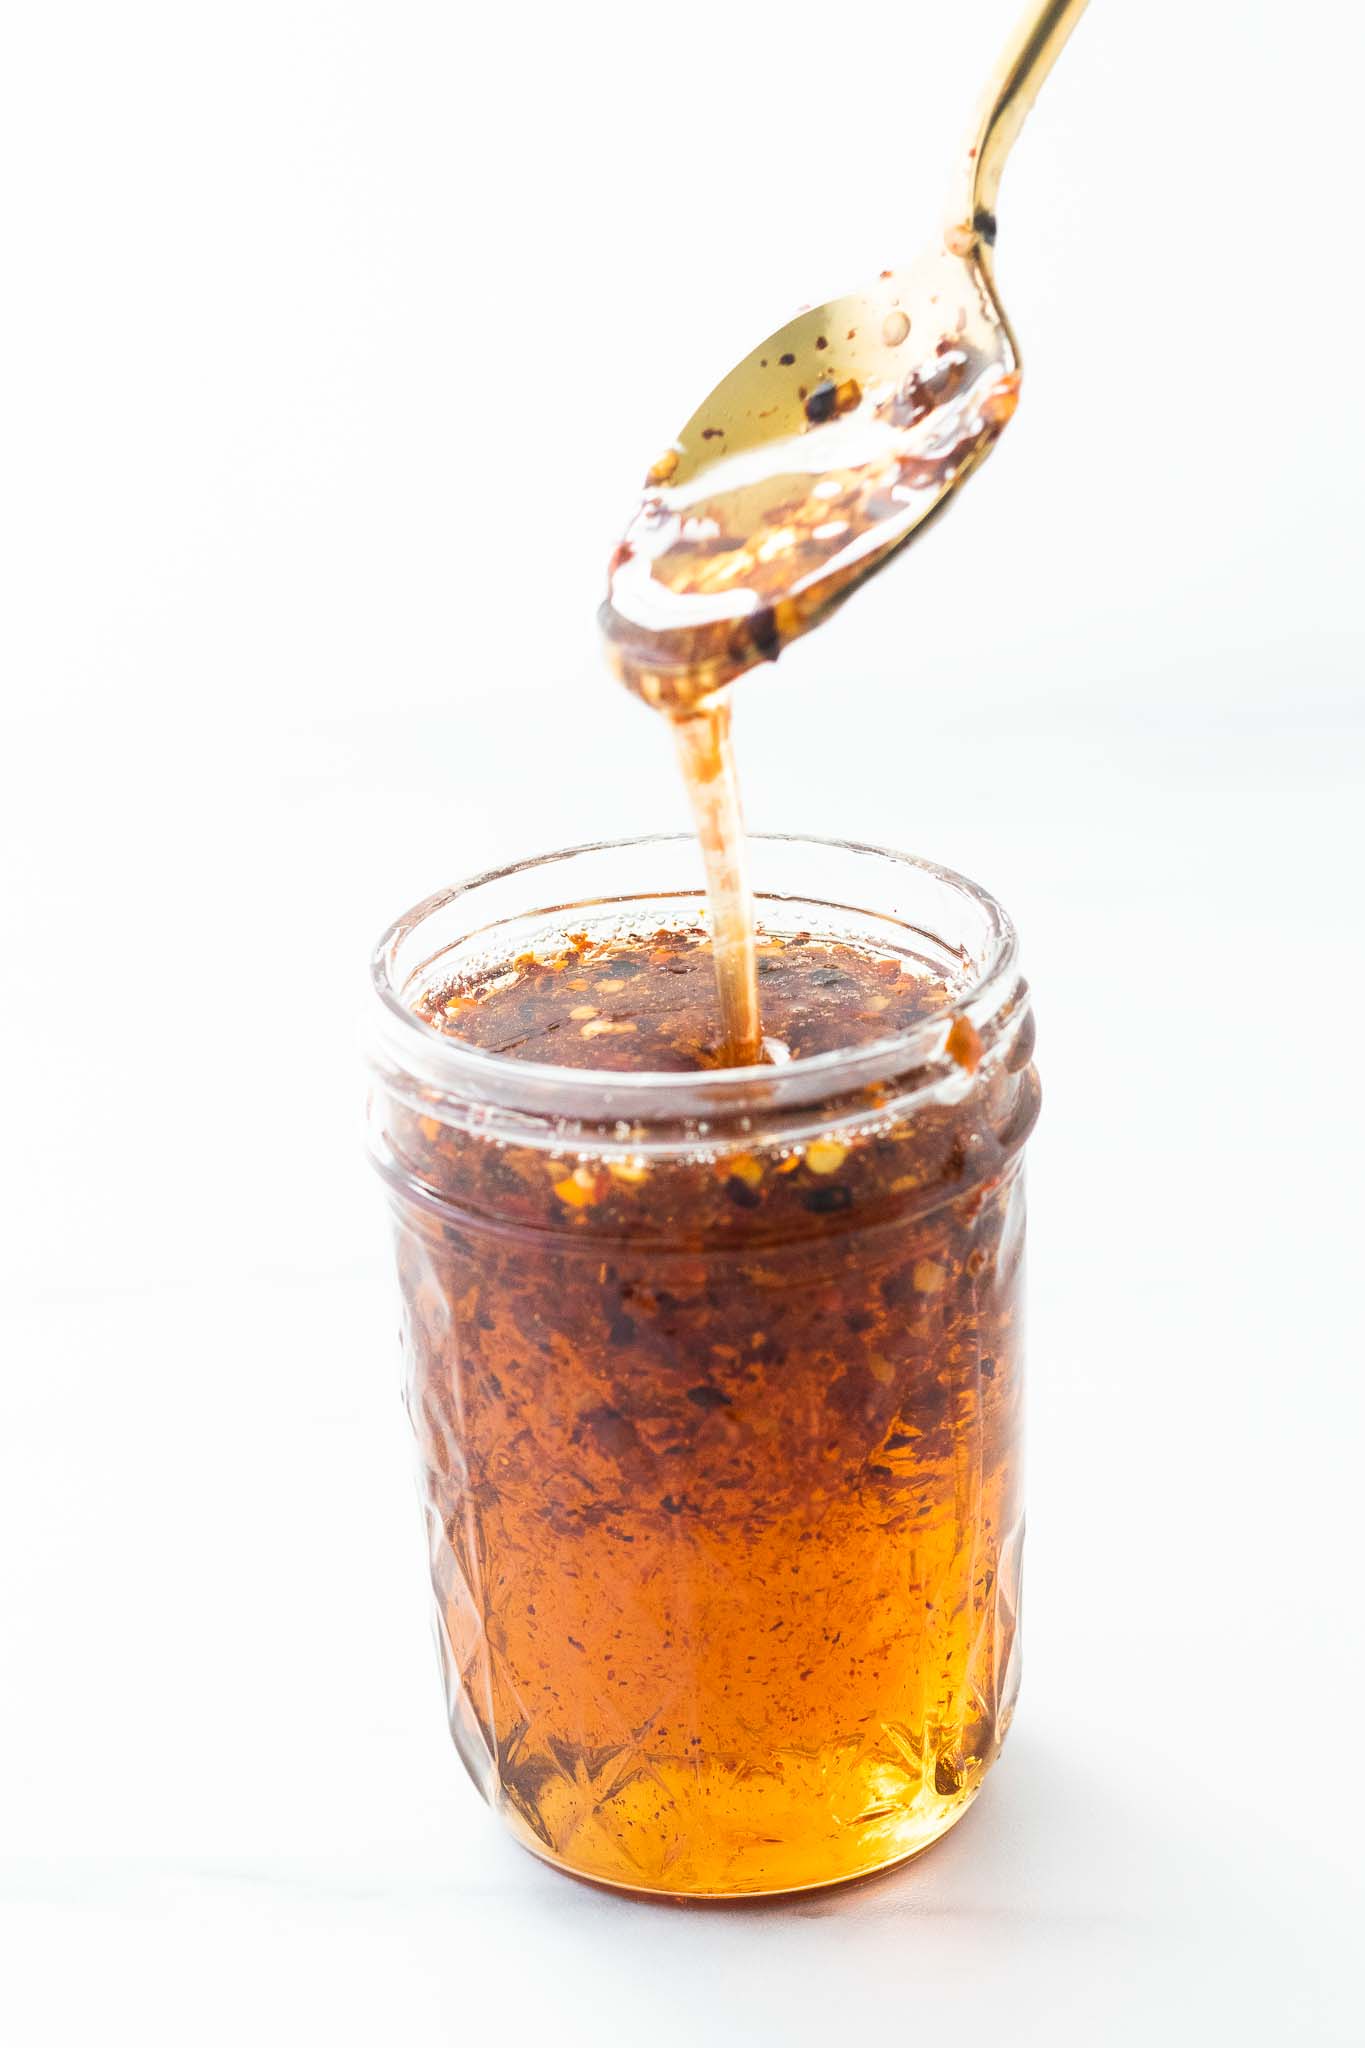 How to Make Hot Honey - BEYOND THE NOMS